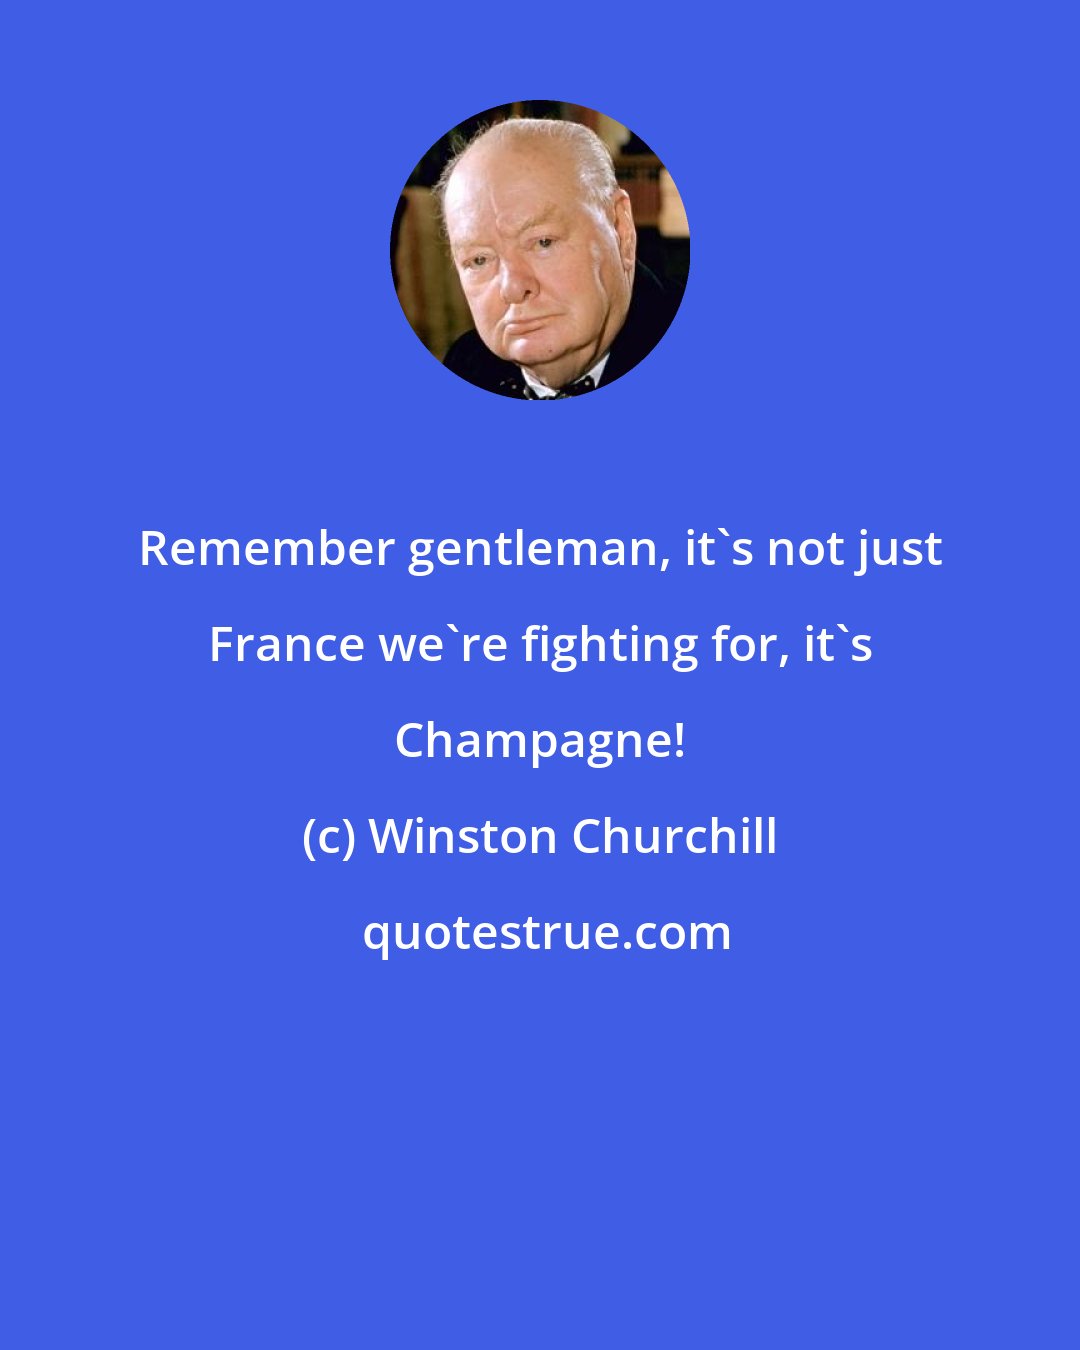 Winston Churchill: Remember gentleman, it's not just France we're fighting for, it's Champagne!